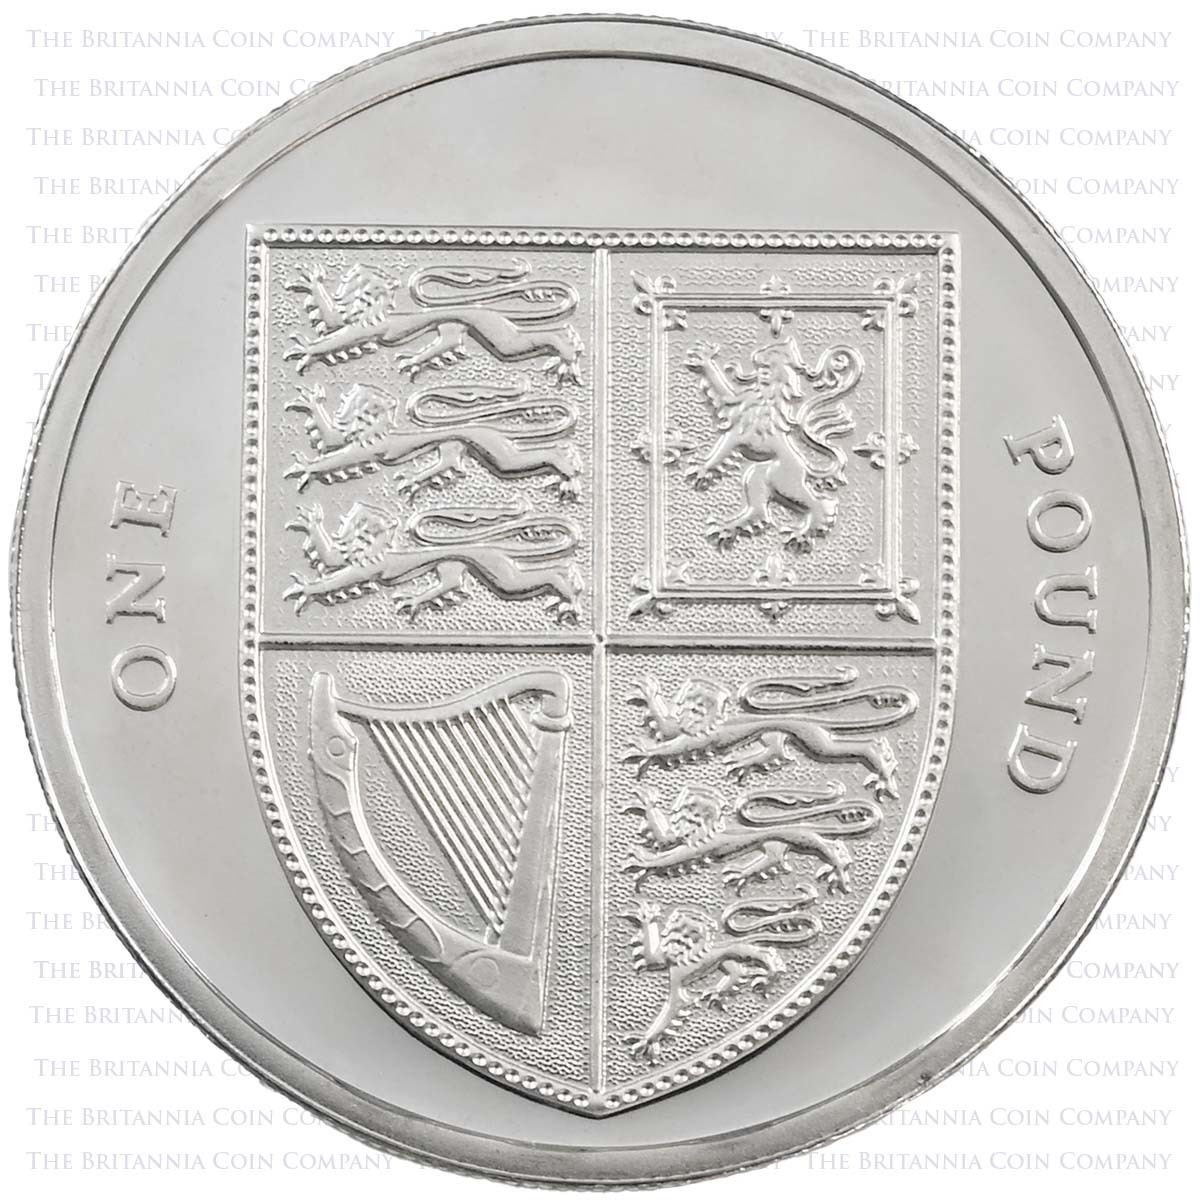 UK08MDSP 2008 Shield Royal Of Arms £1 Silver Proof Reverse